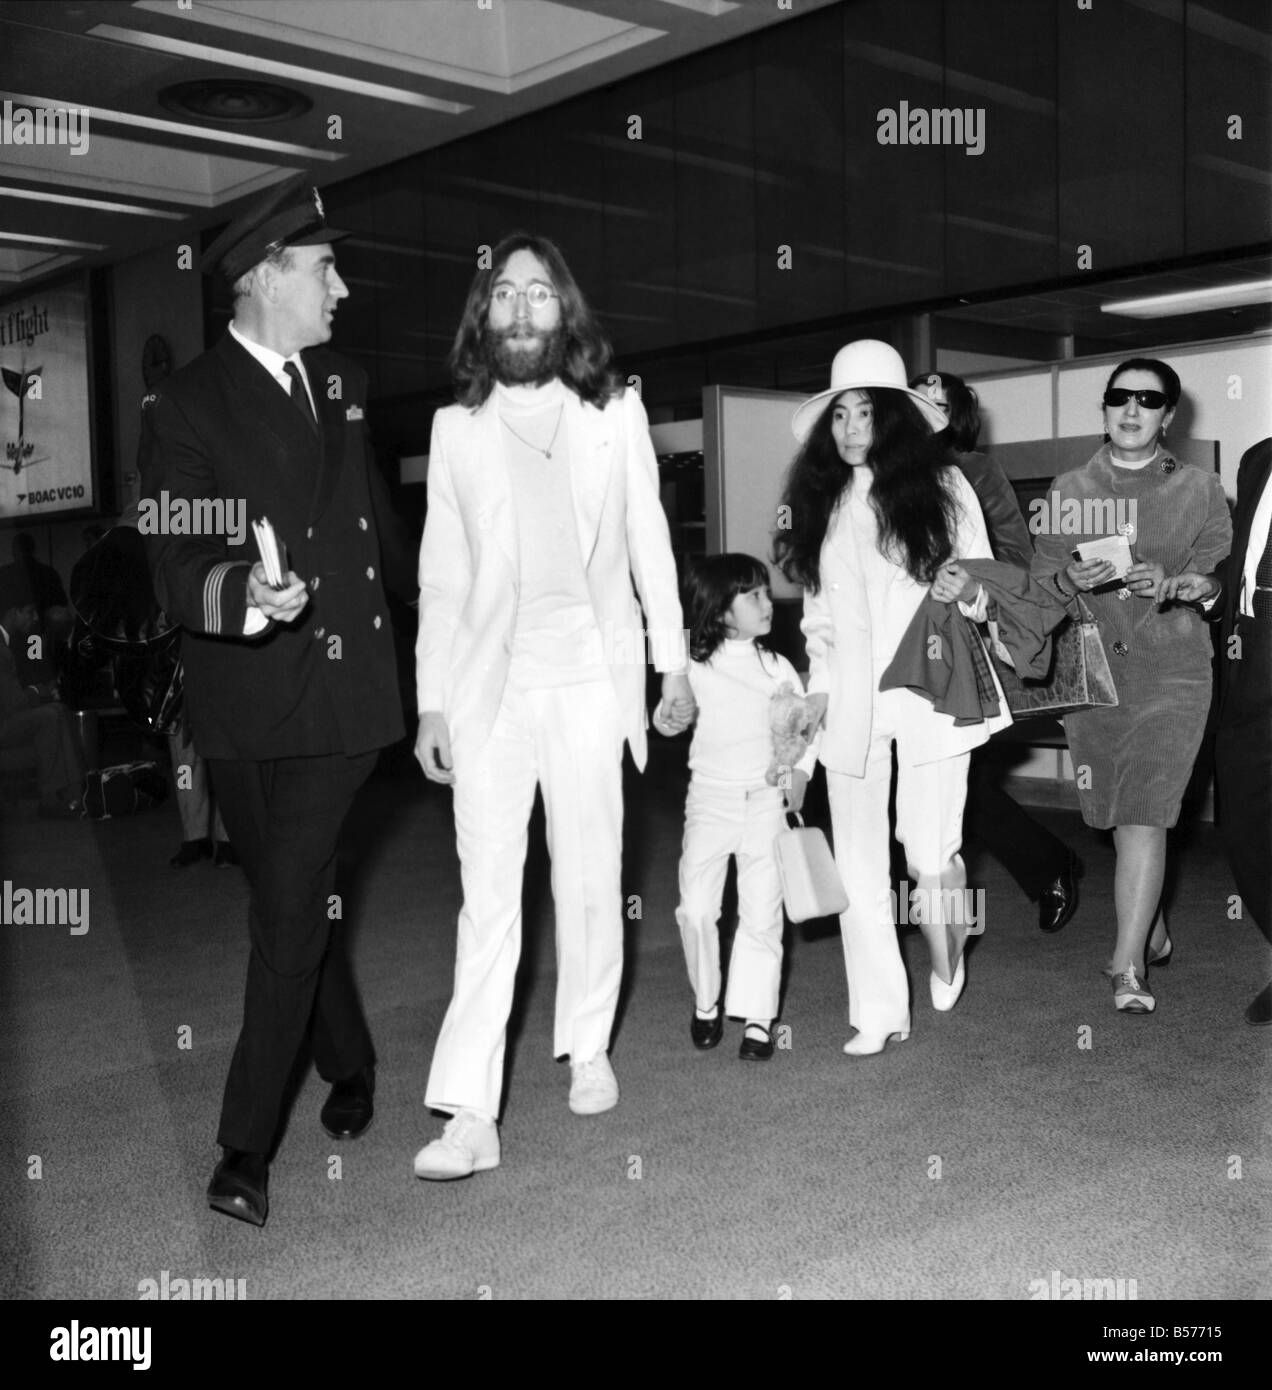 Beatle John Lennon and his wife Yoko Ono left Heathrow Airport London this afternoon (Sat) to fly to the Bahomes for another Bed Stock Photo